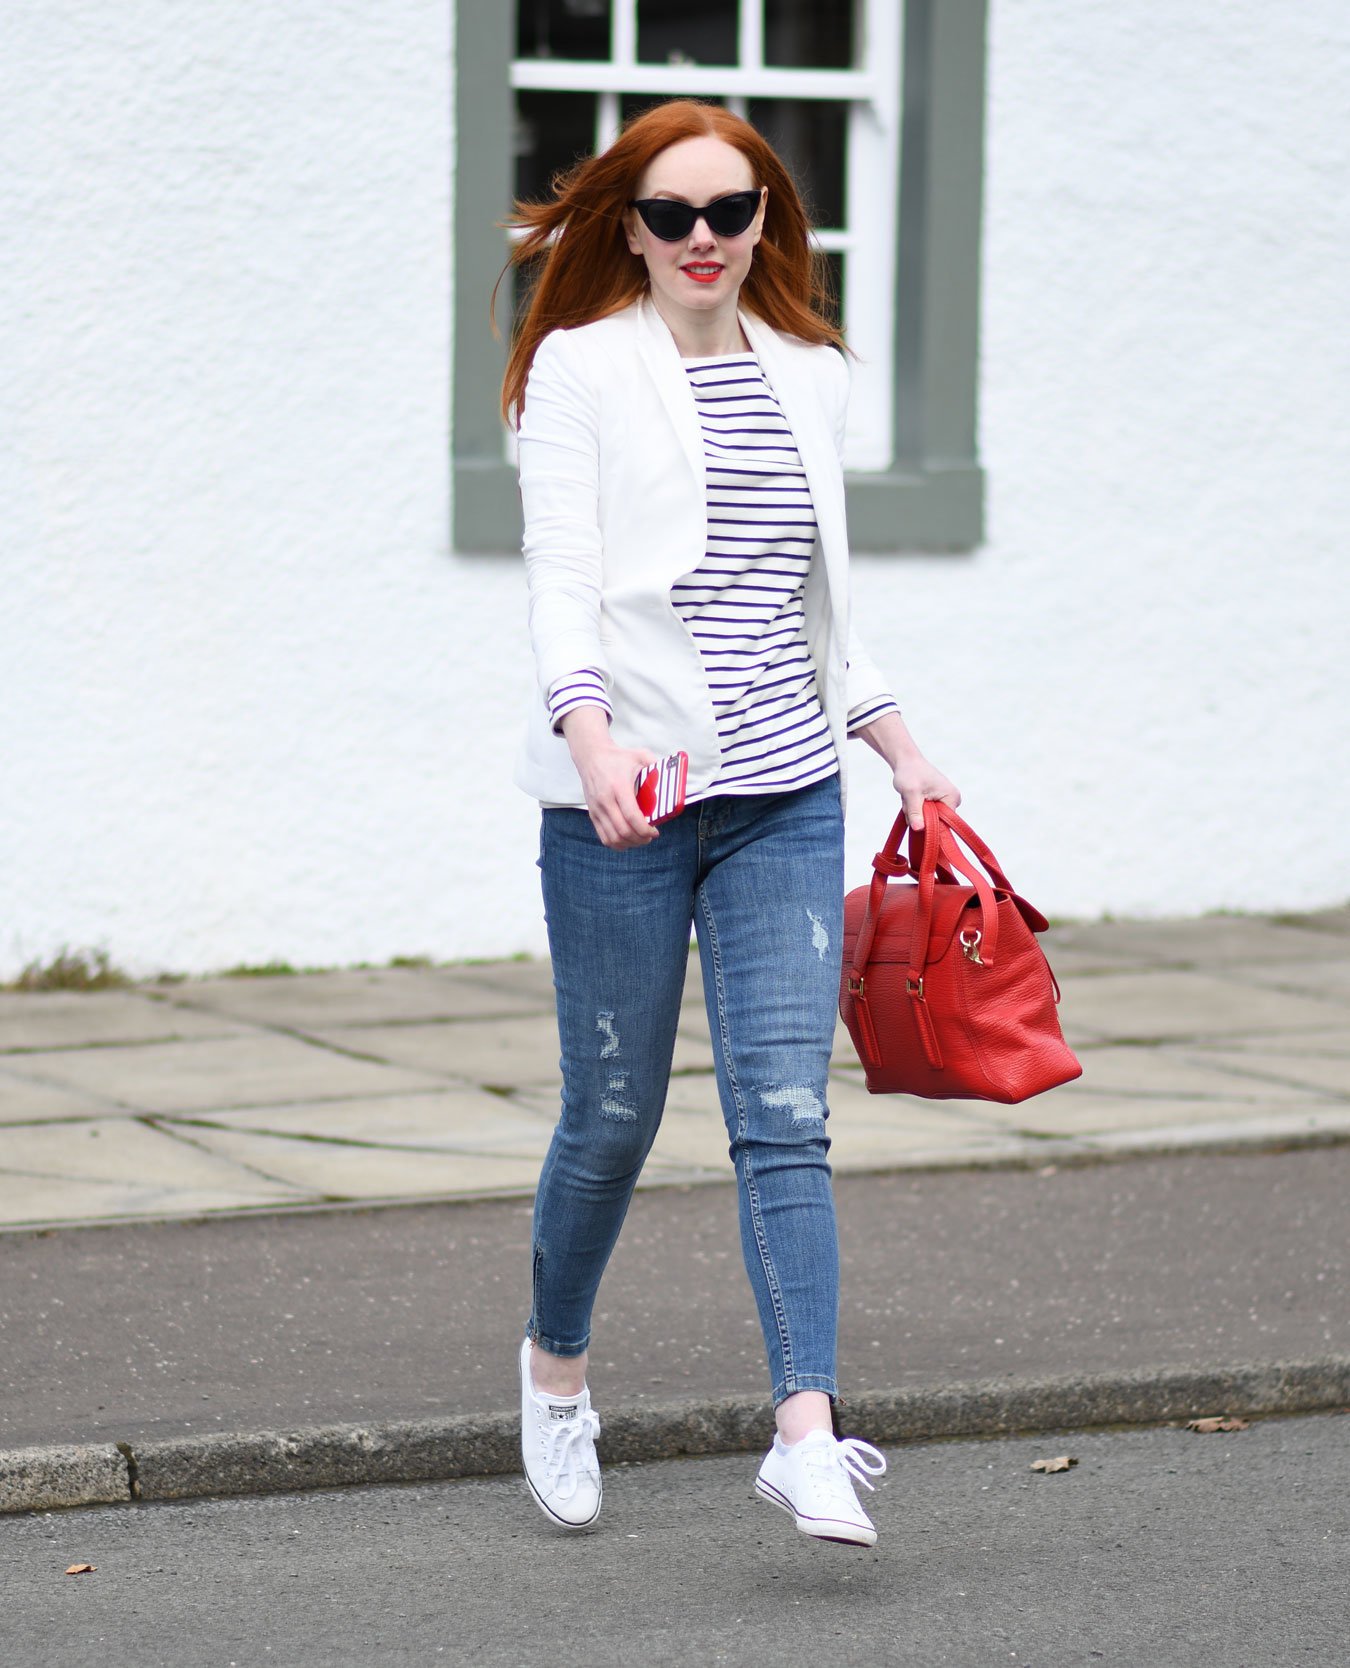 Breton top with blue jeans outfit